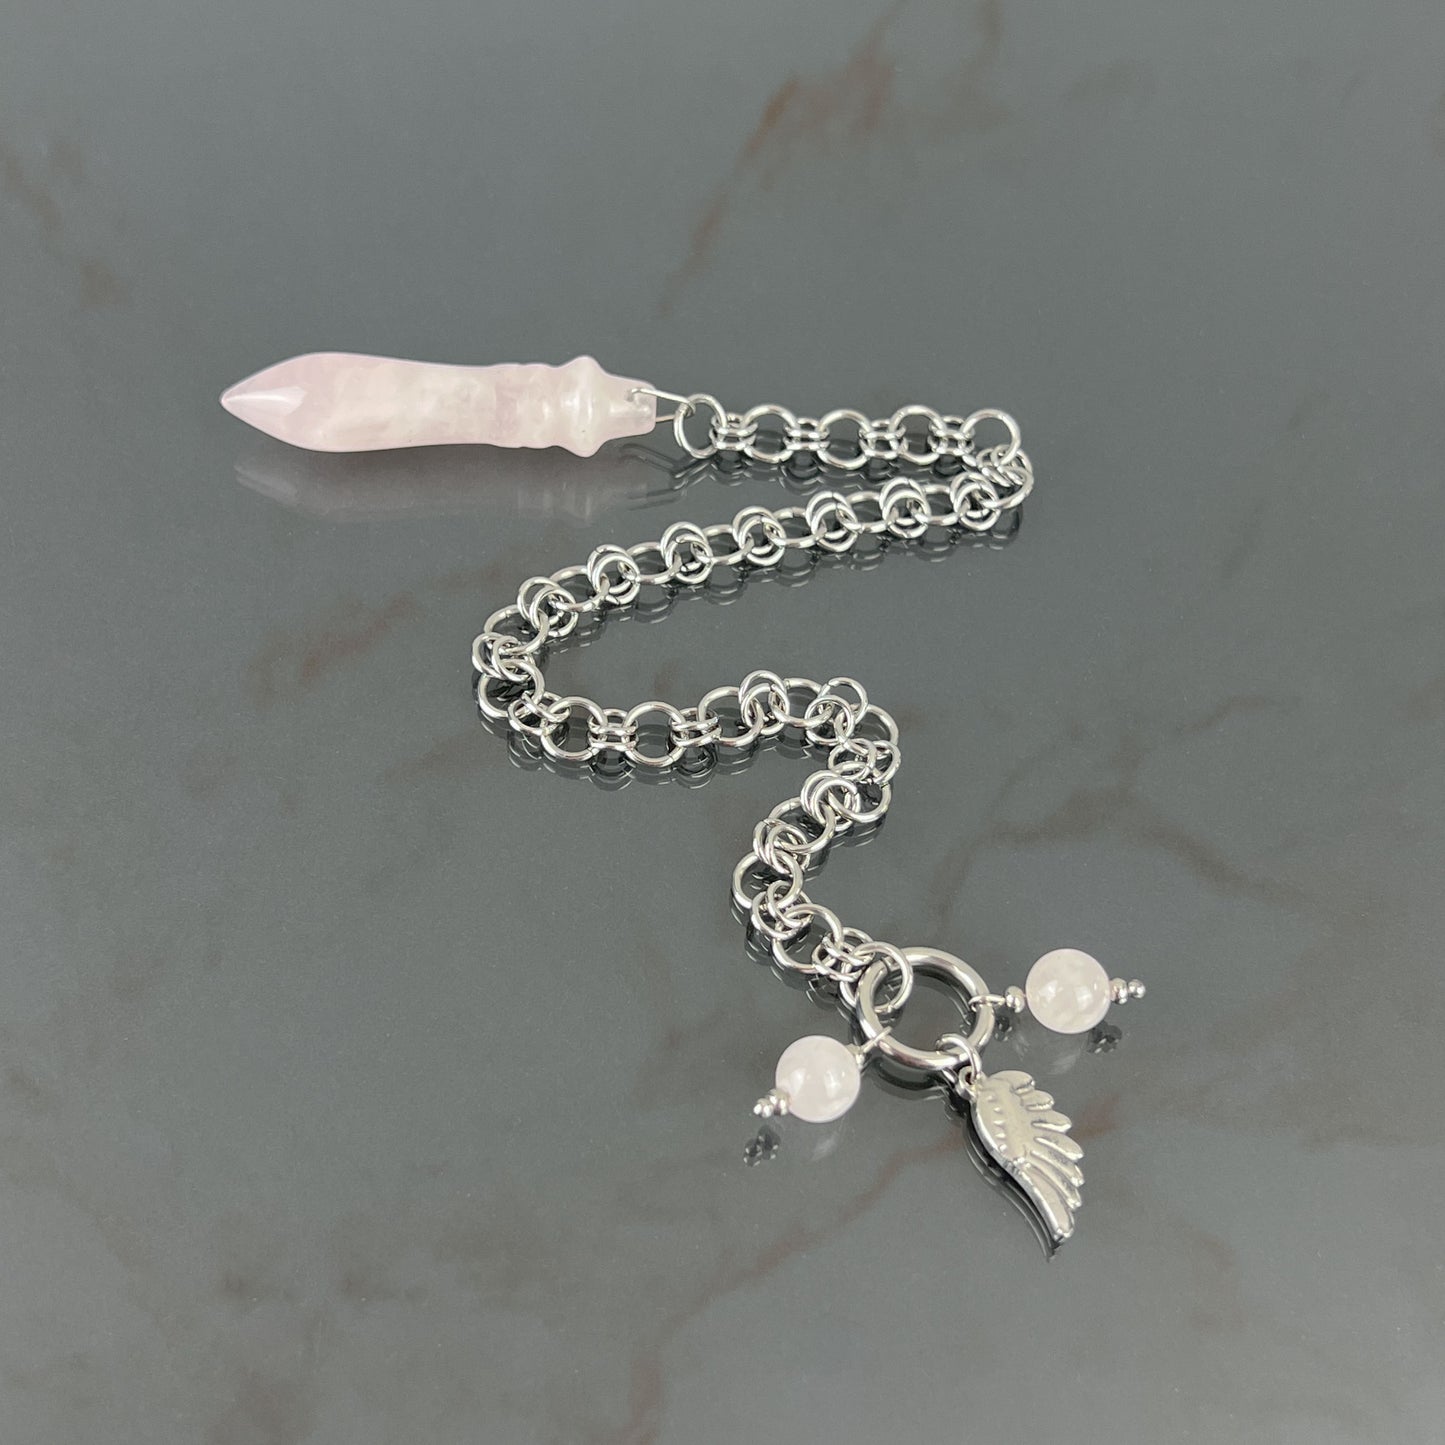 Egyptian Thot pendulum rose quartz chainmail, wing and stainless steel